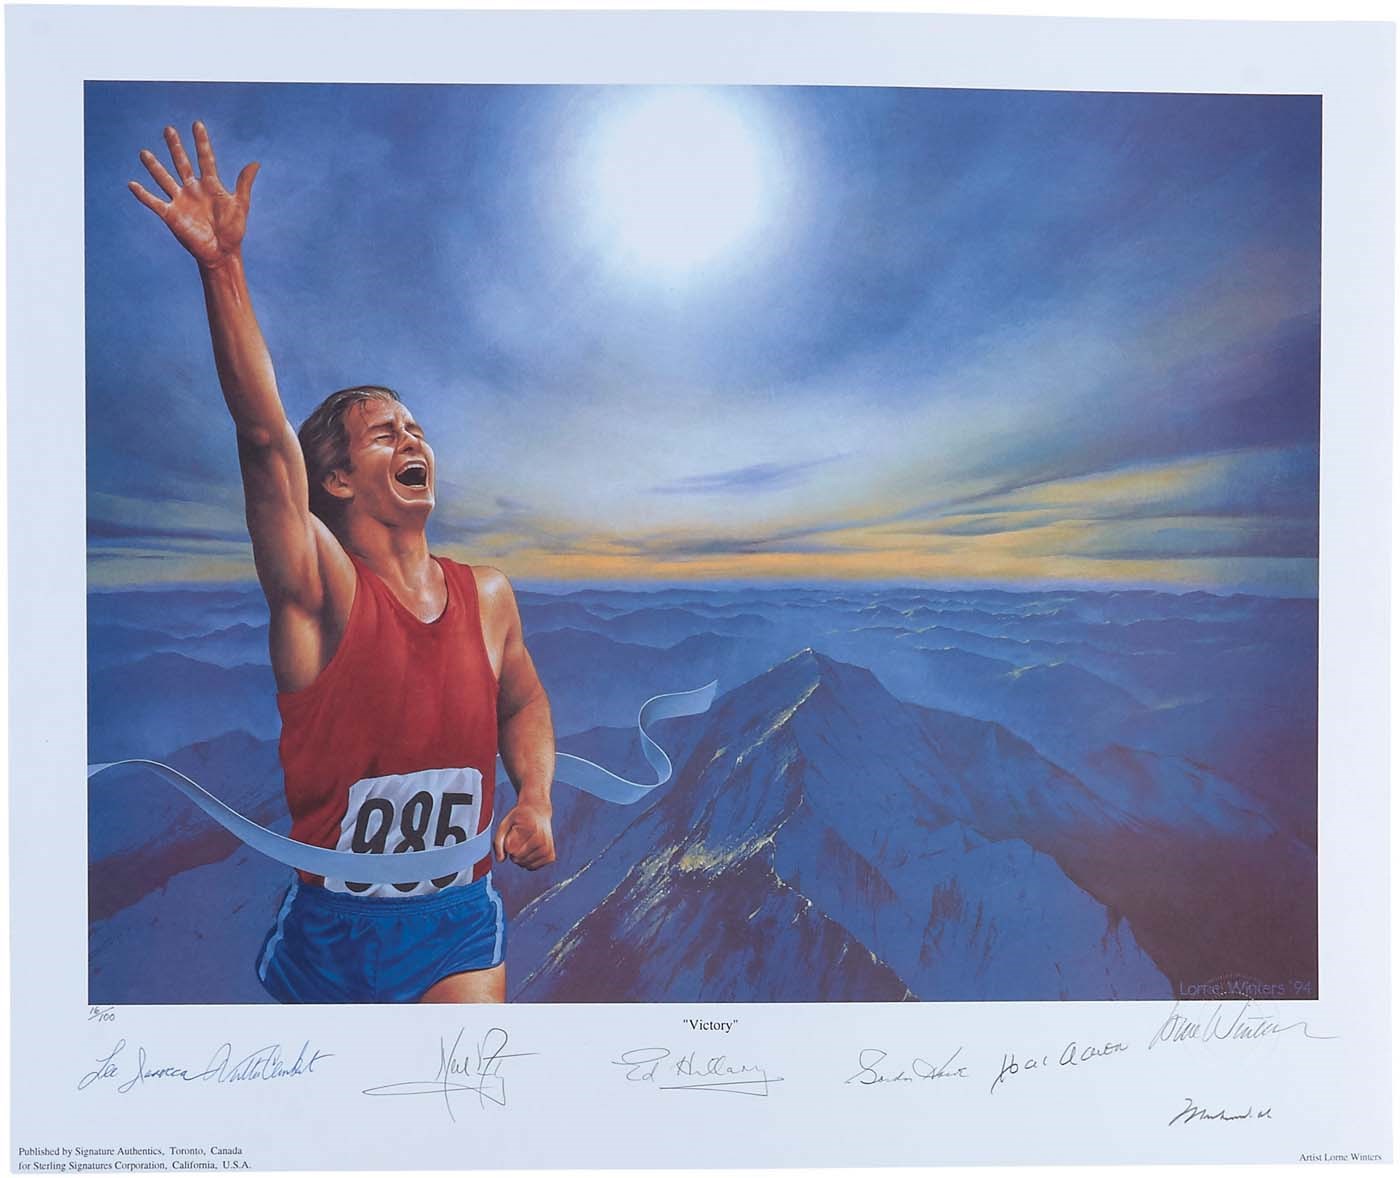 Victory Limited Edition Signed Lithograph (Armstrong, Ali, Aaron, Howe, etc) (PSA)